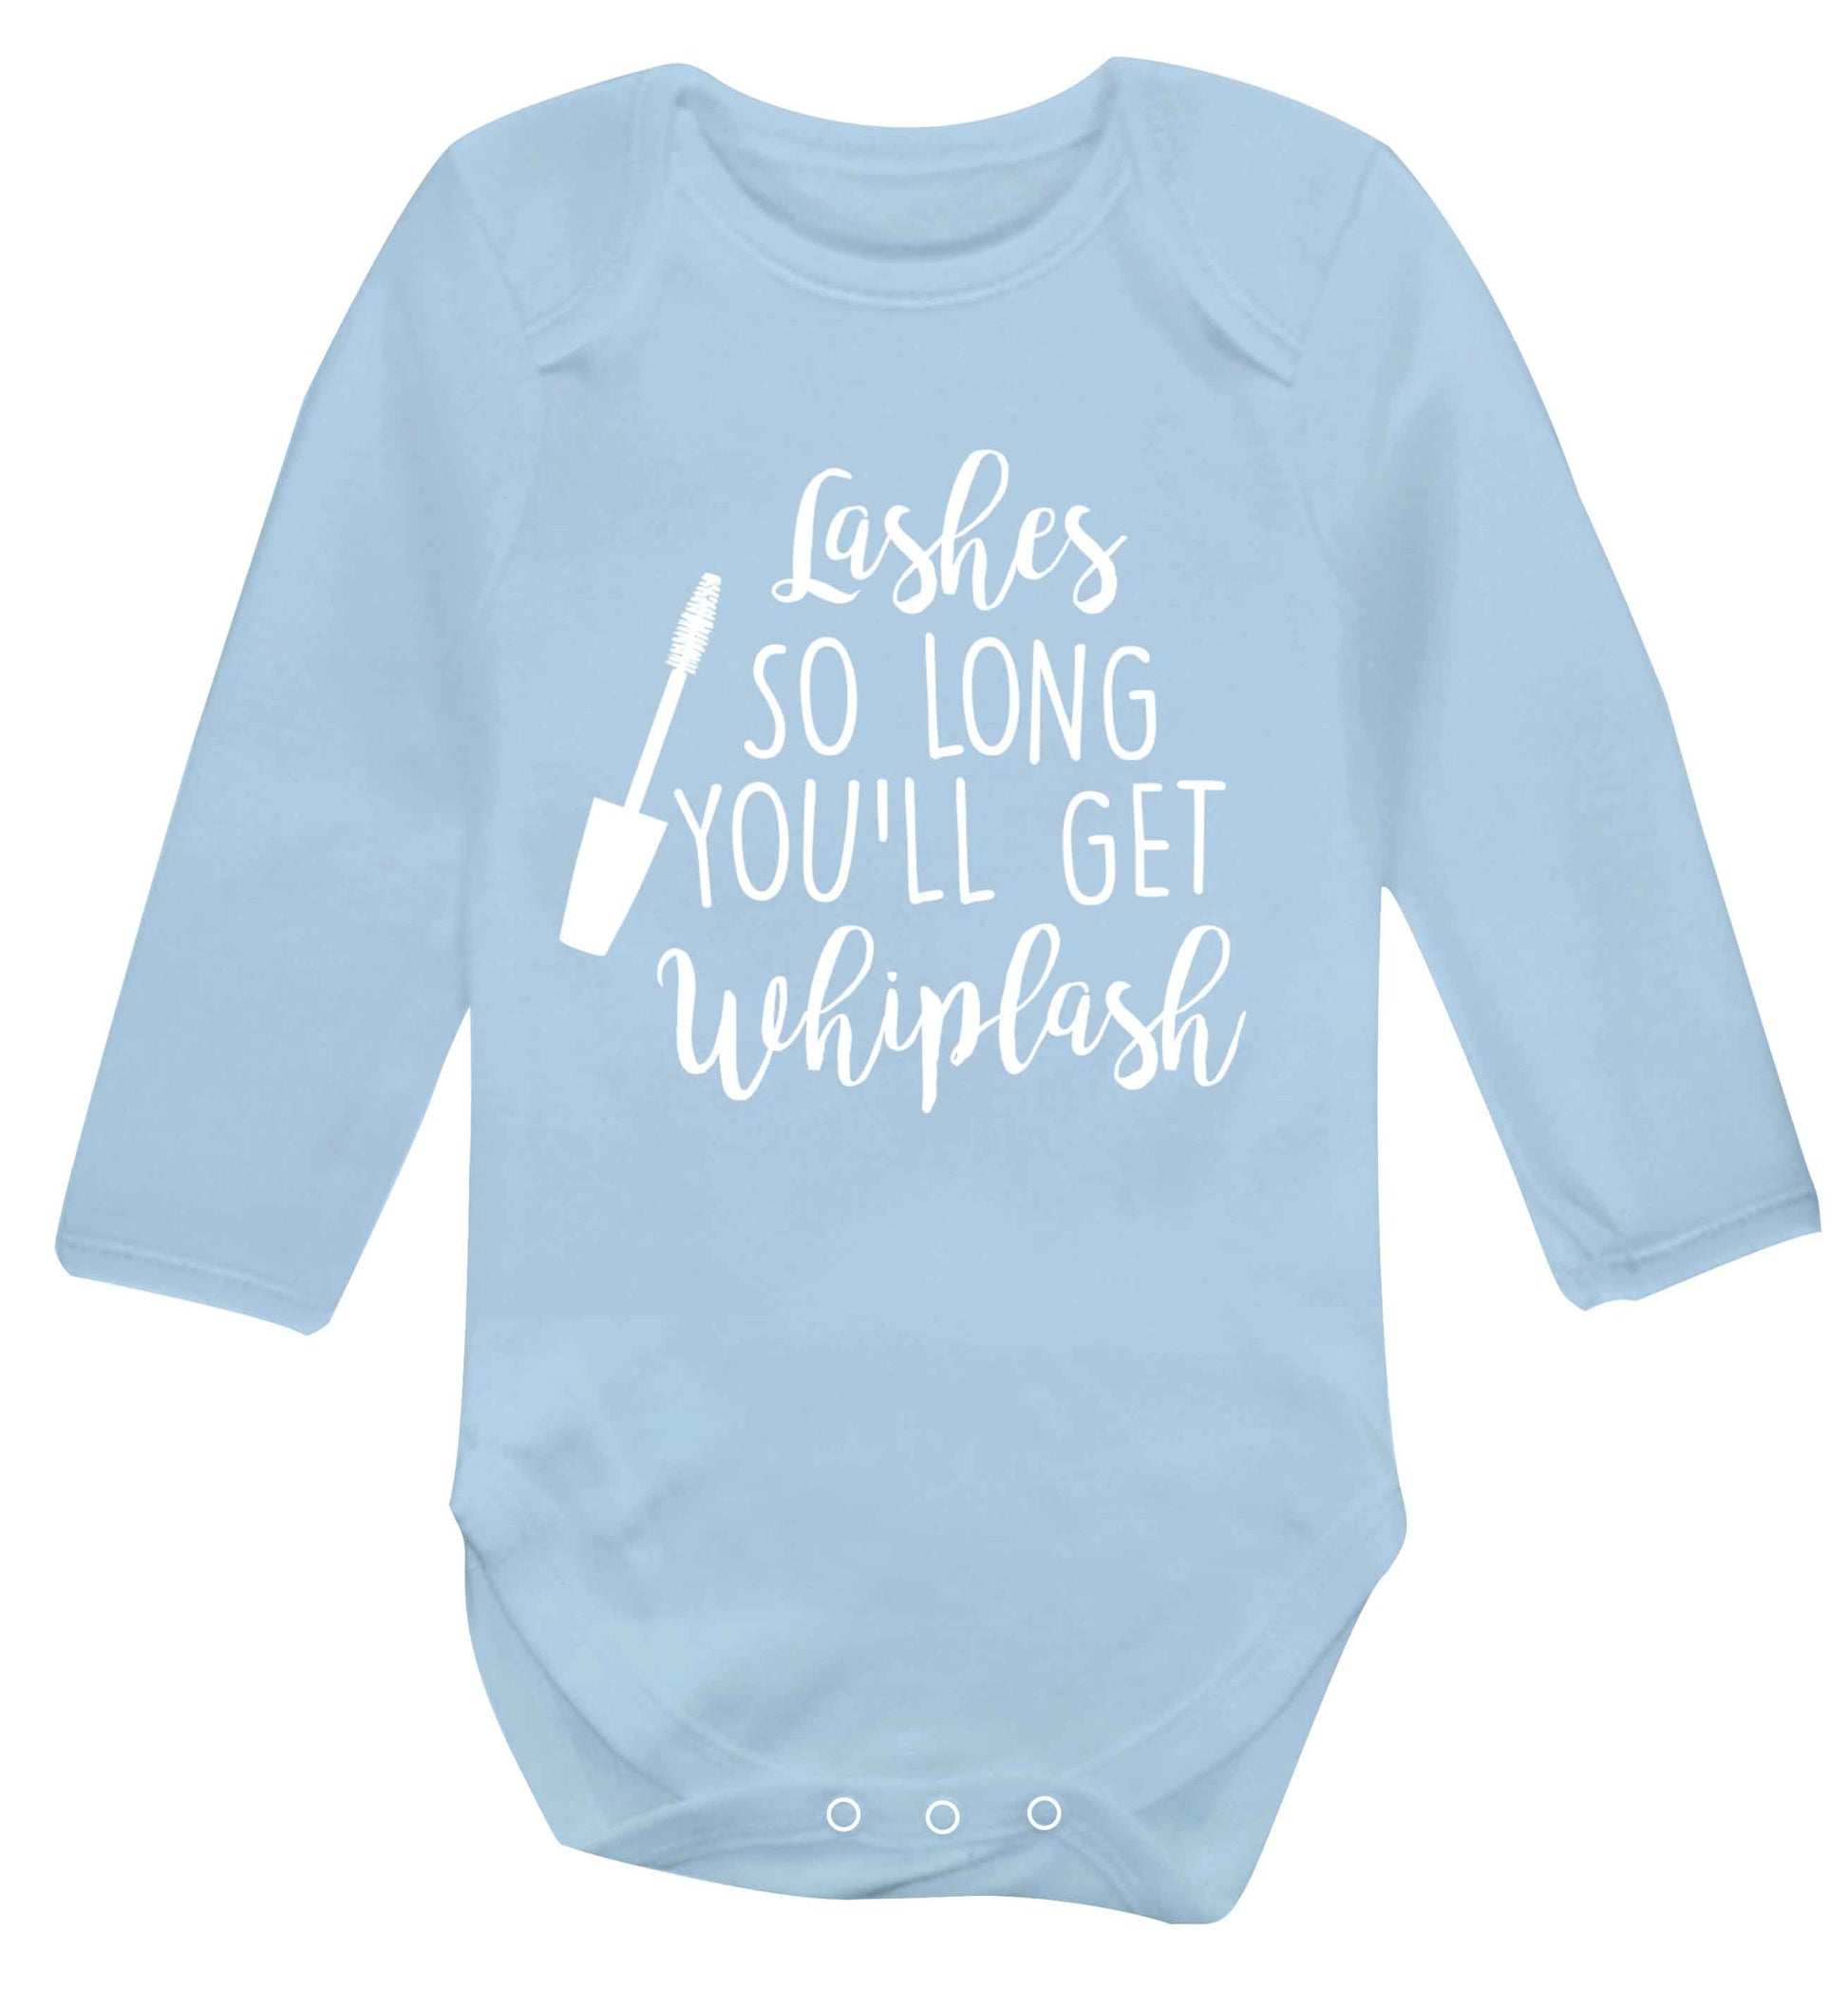 Lashes so long you'll get whiplash Baby Vest long sleeved pale blue 6-12 months